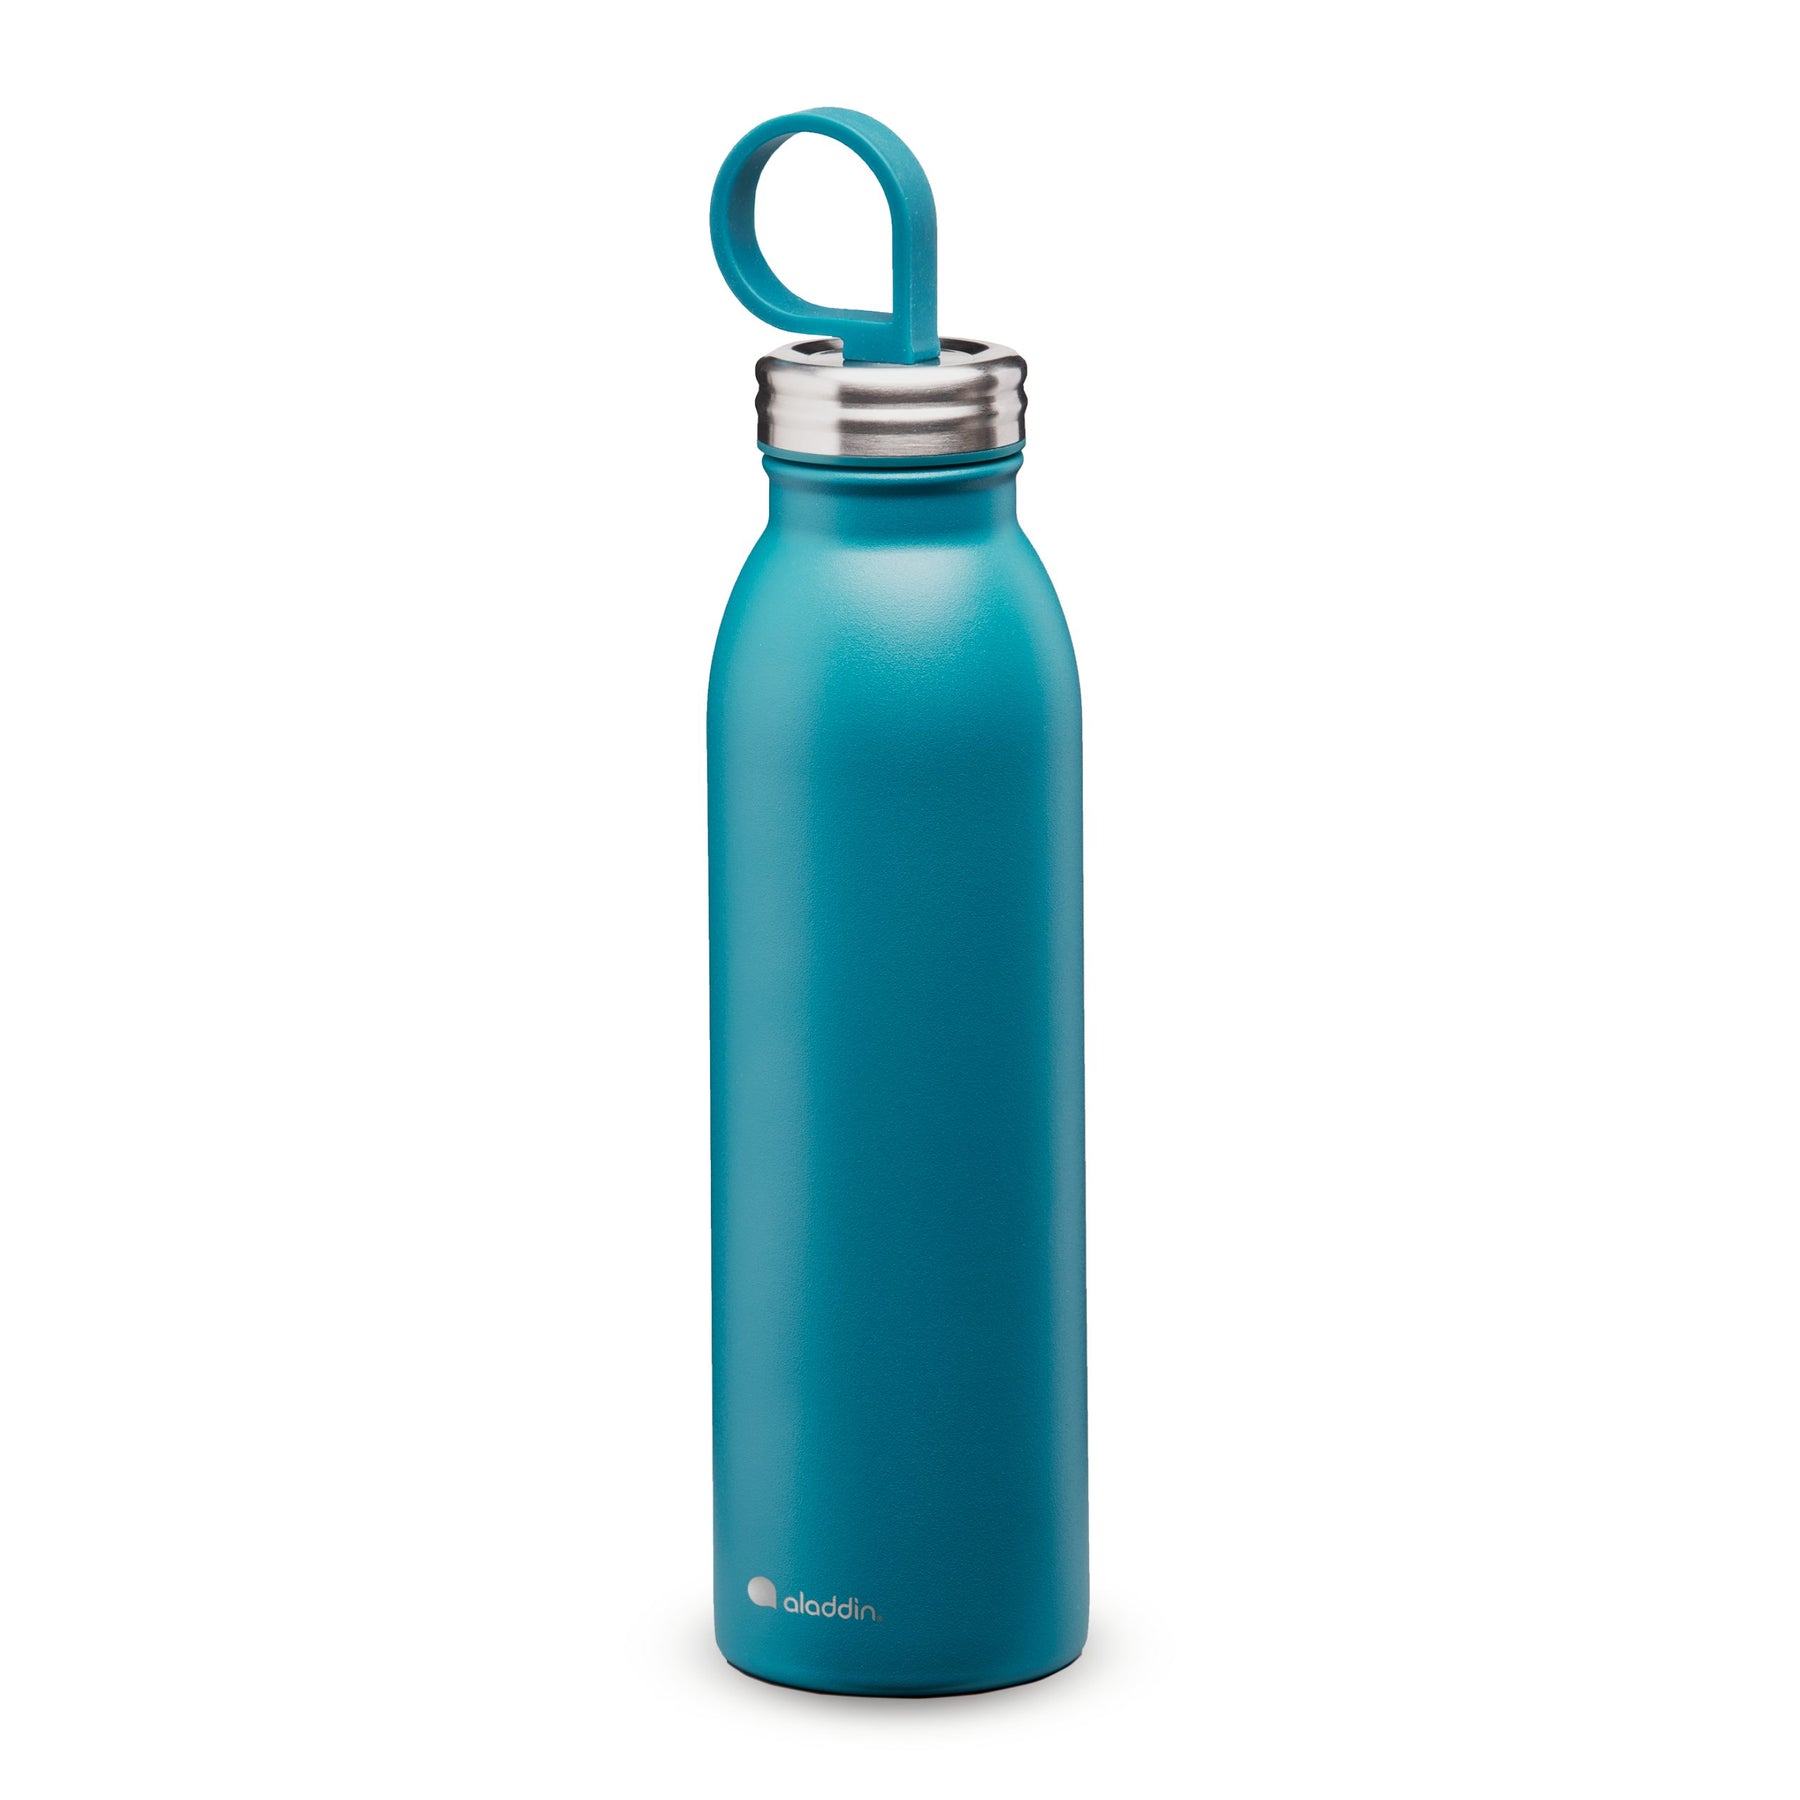 Aladdin-Chilled-Thermavac_-Colour-Stainless-Steel-Water-Bottle-0.55L-Aqua-Blue-10-09425-004-Hero_1800x1800